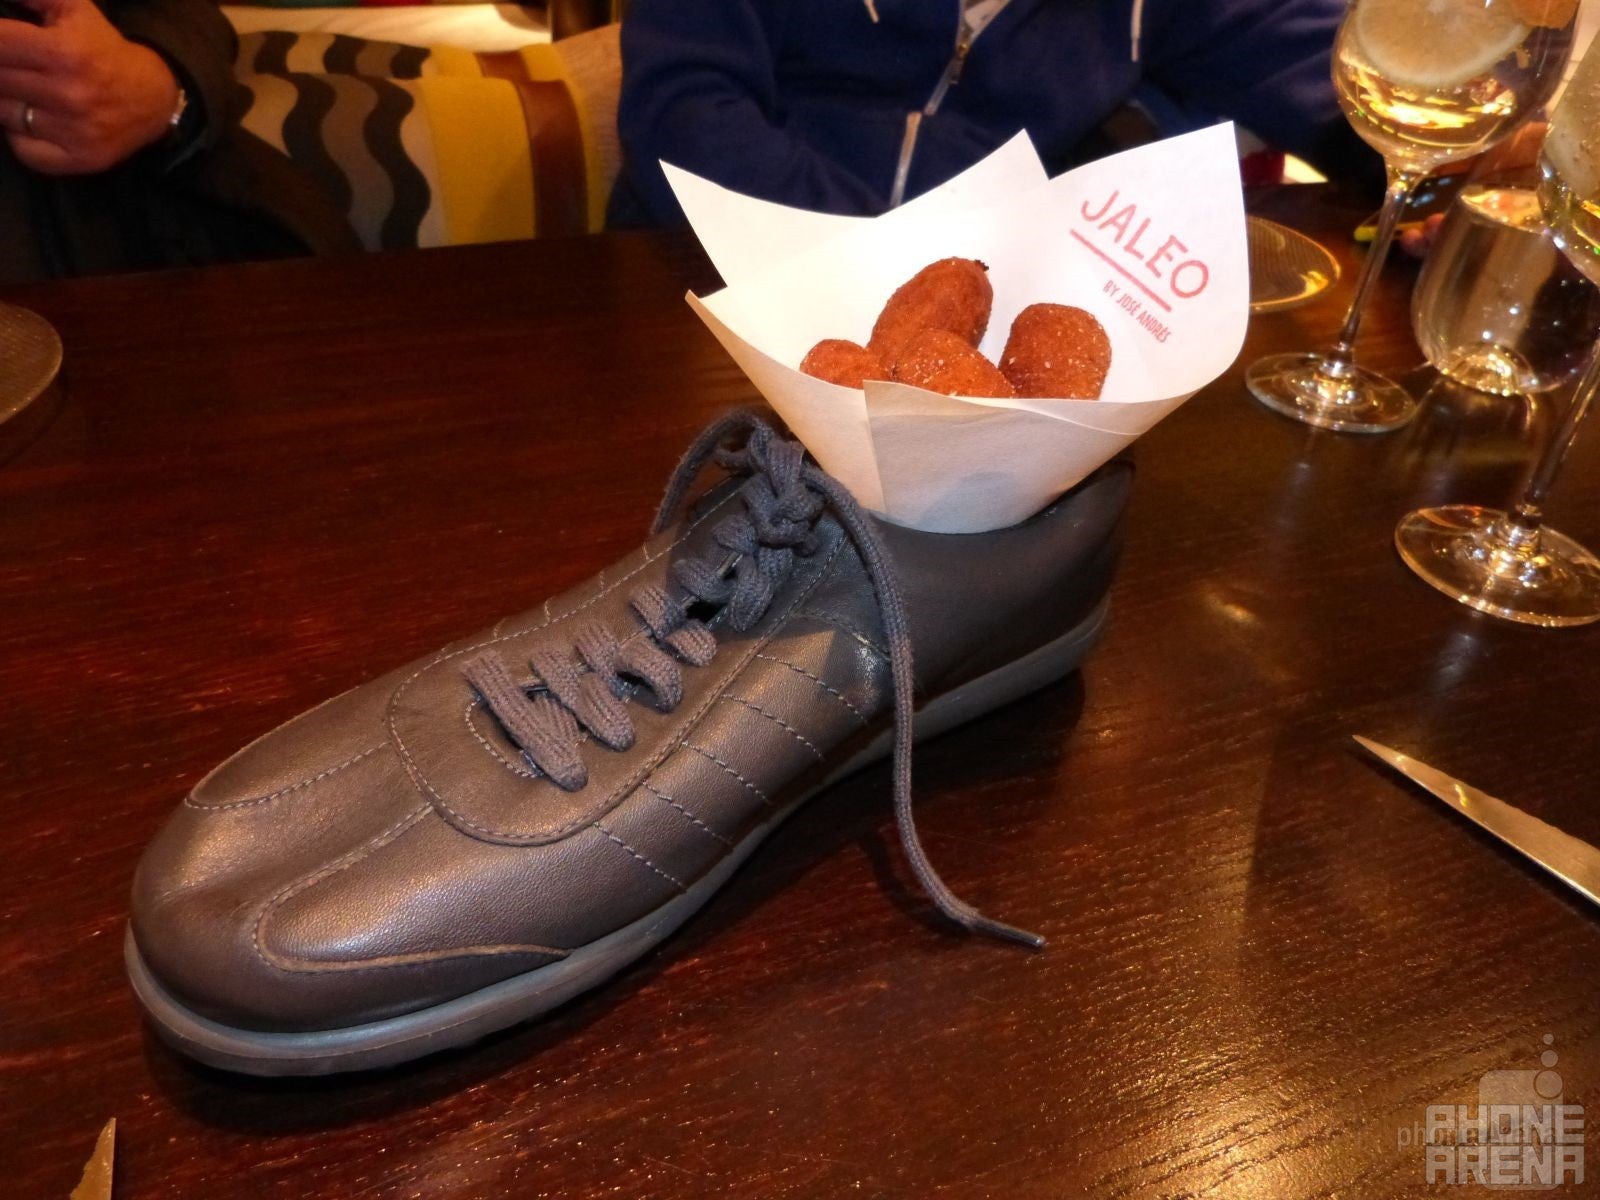 Yes, that is food being served in a shoe, a trademark of the Jaleo restaurant - PhoneArena joins Nokia’s VP &amp; GM of Developer Experience for dinner at CES 2014